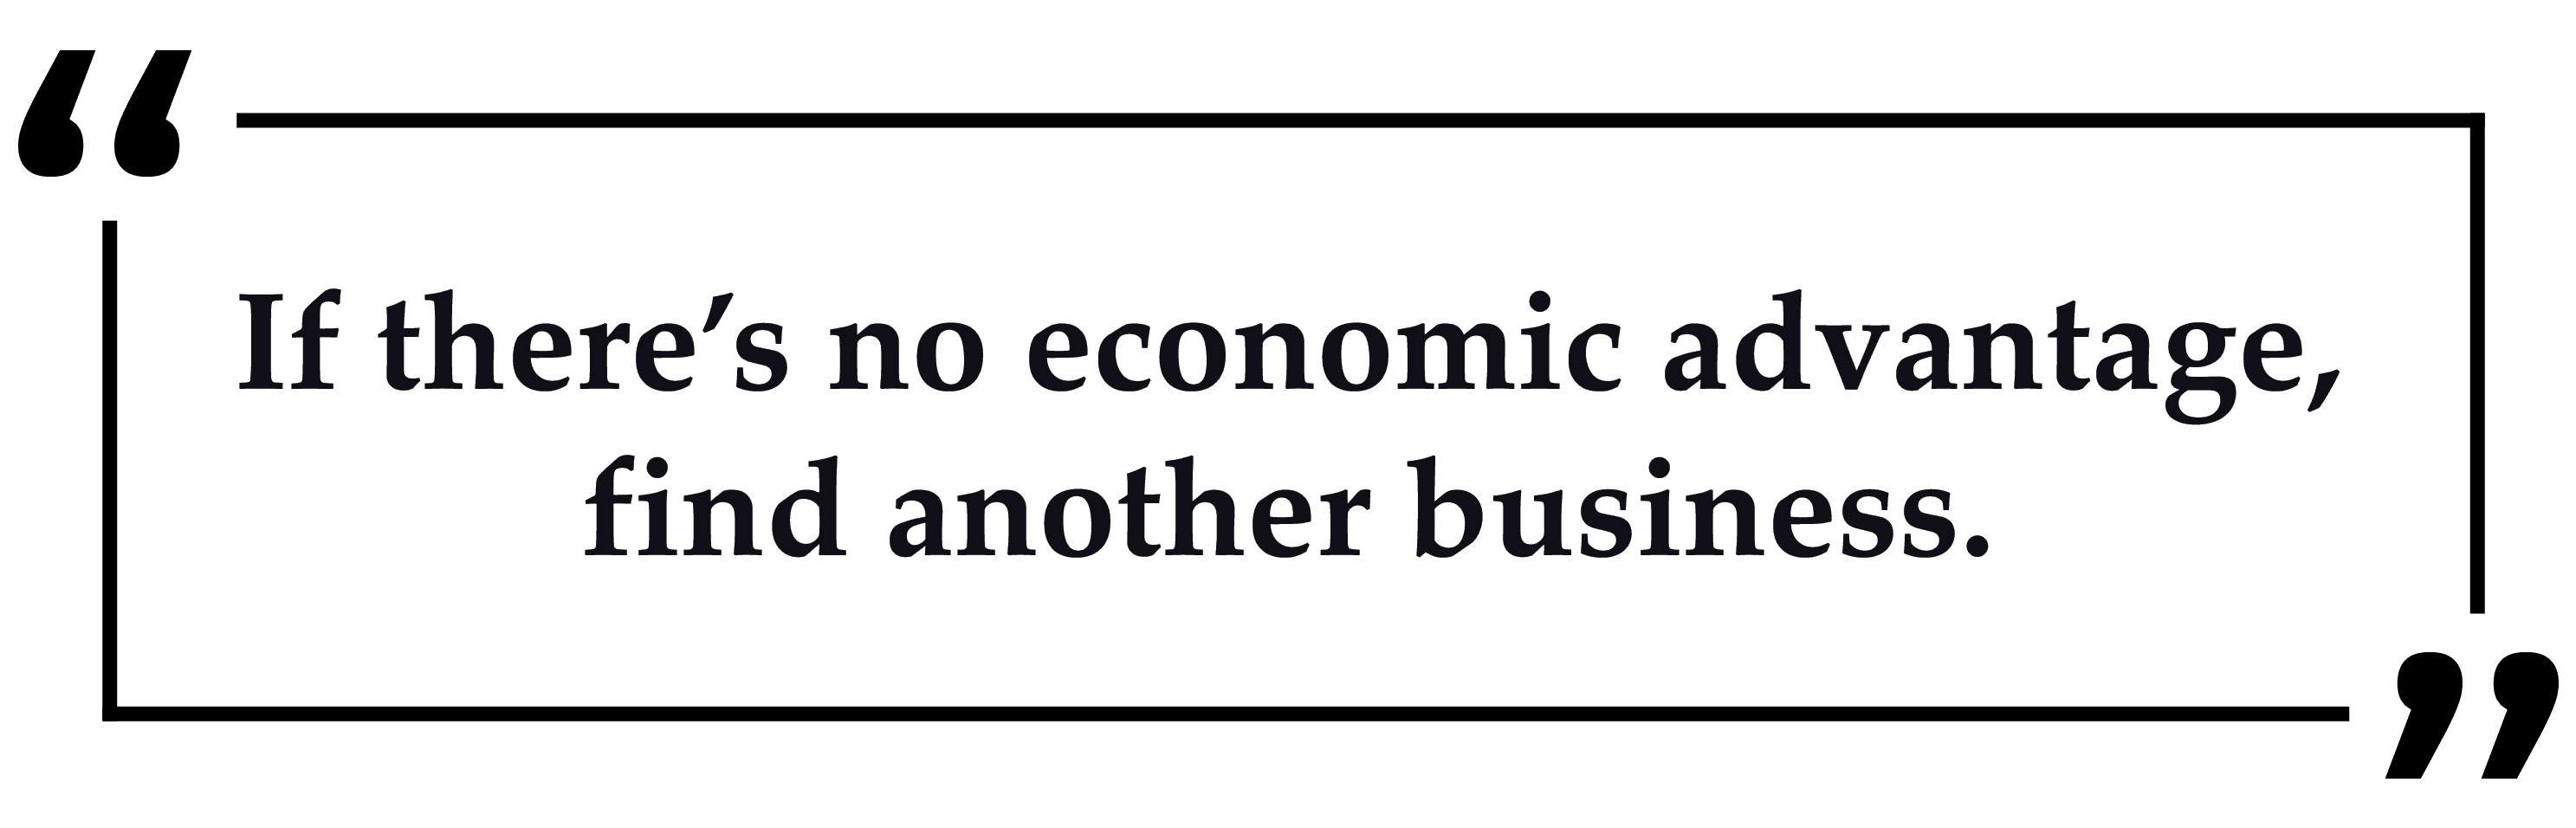 If there's no economic advantage, find another business.